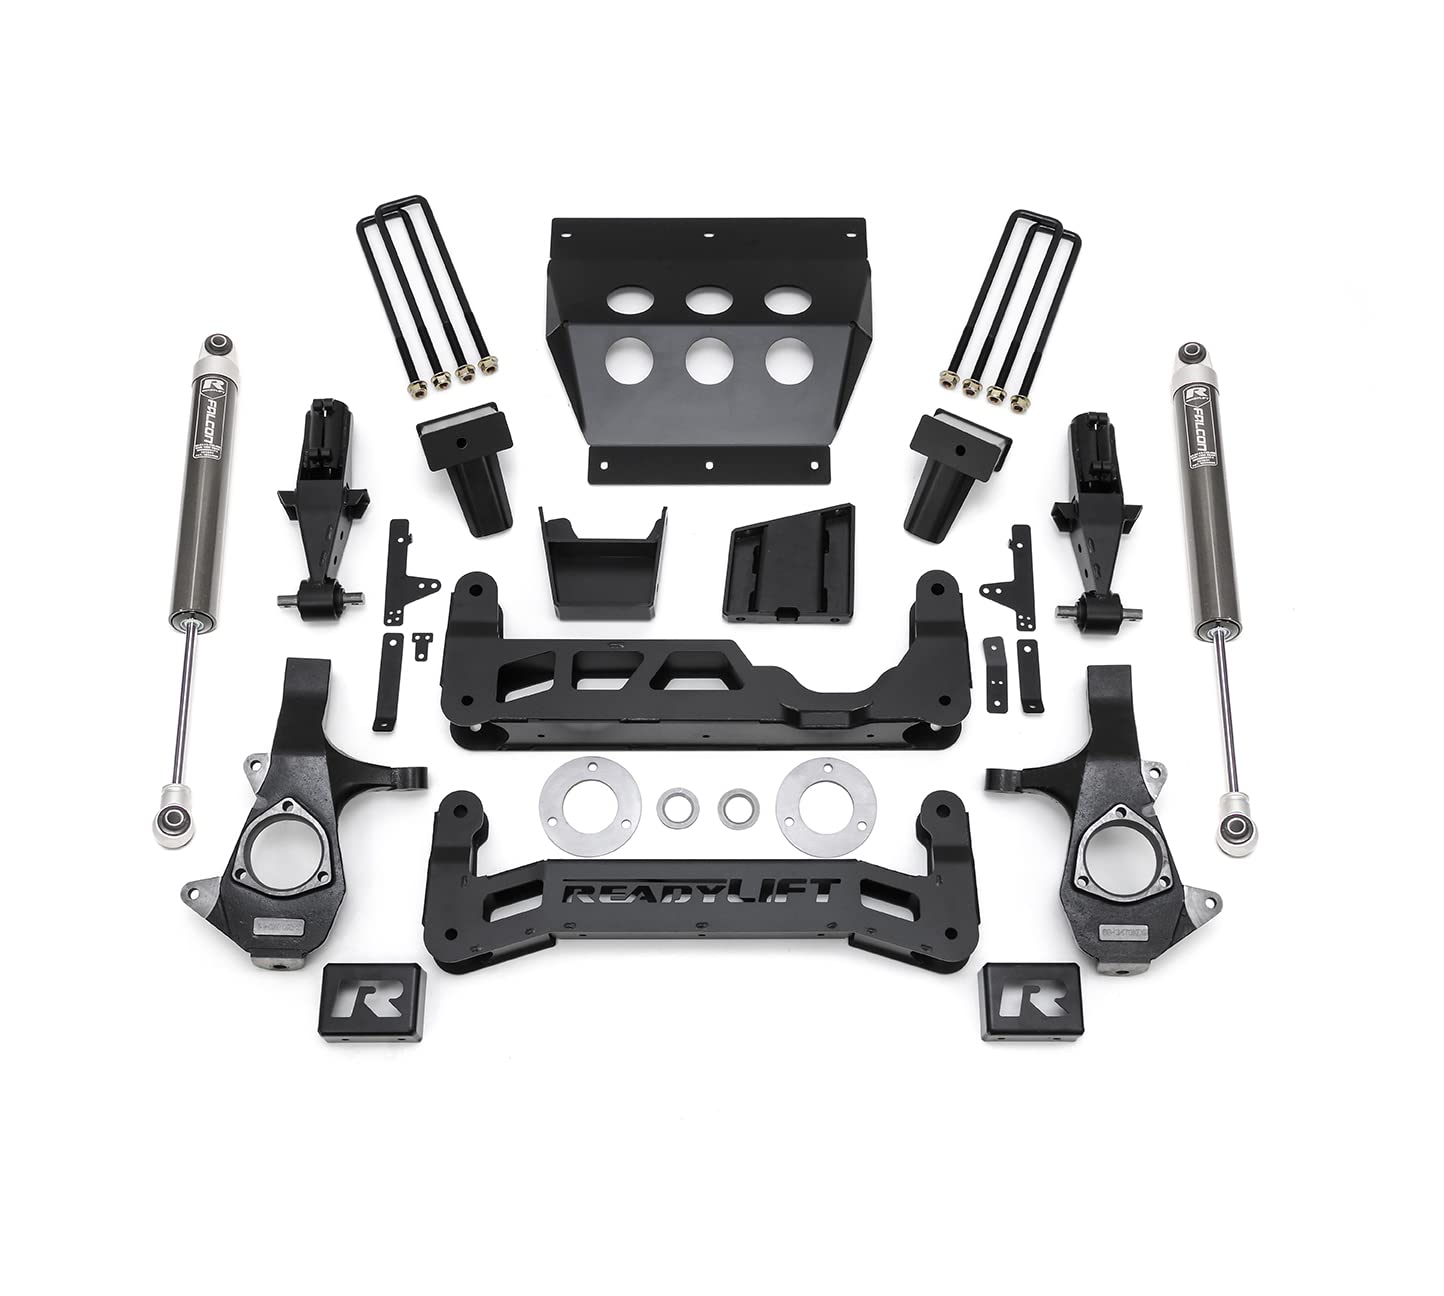 1416.5 CHEV/GMC 1500 RWD/4WD 7IN BIG LIFT KIT FOR ALUMINUM OE UPPER CONTROL ARMS W/ FALCON SHOCKS